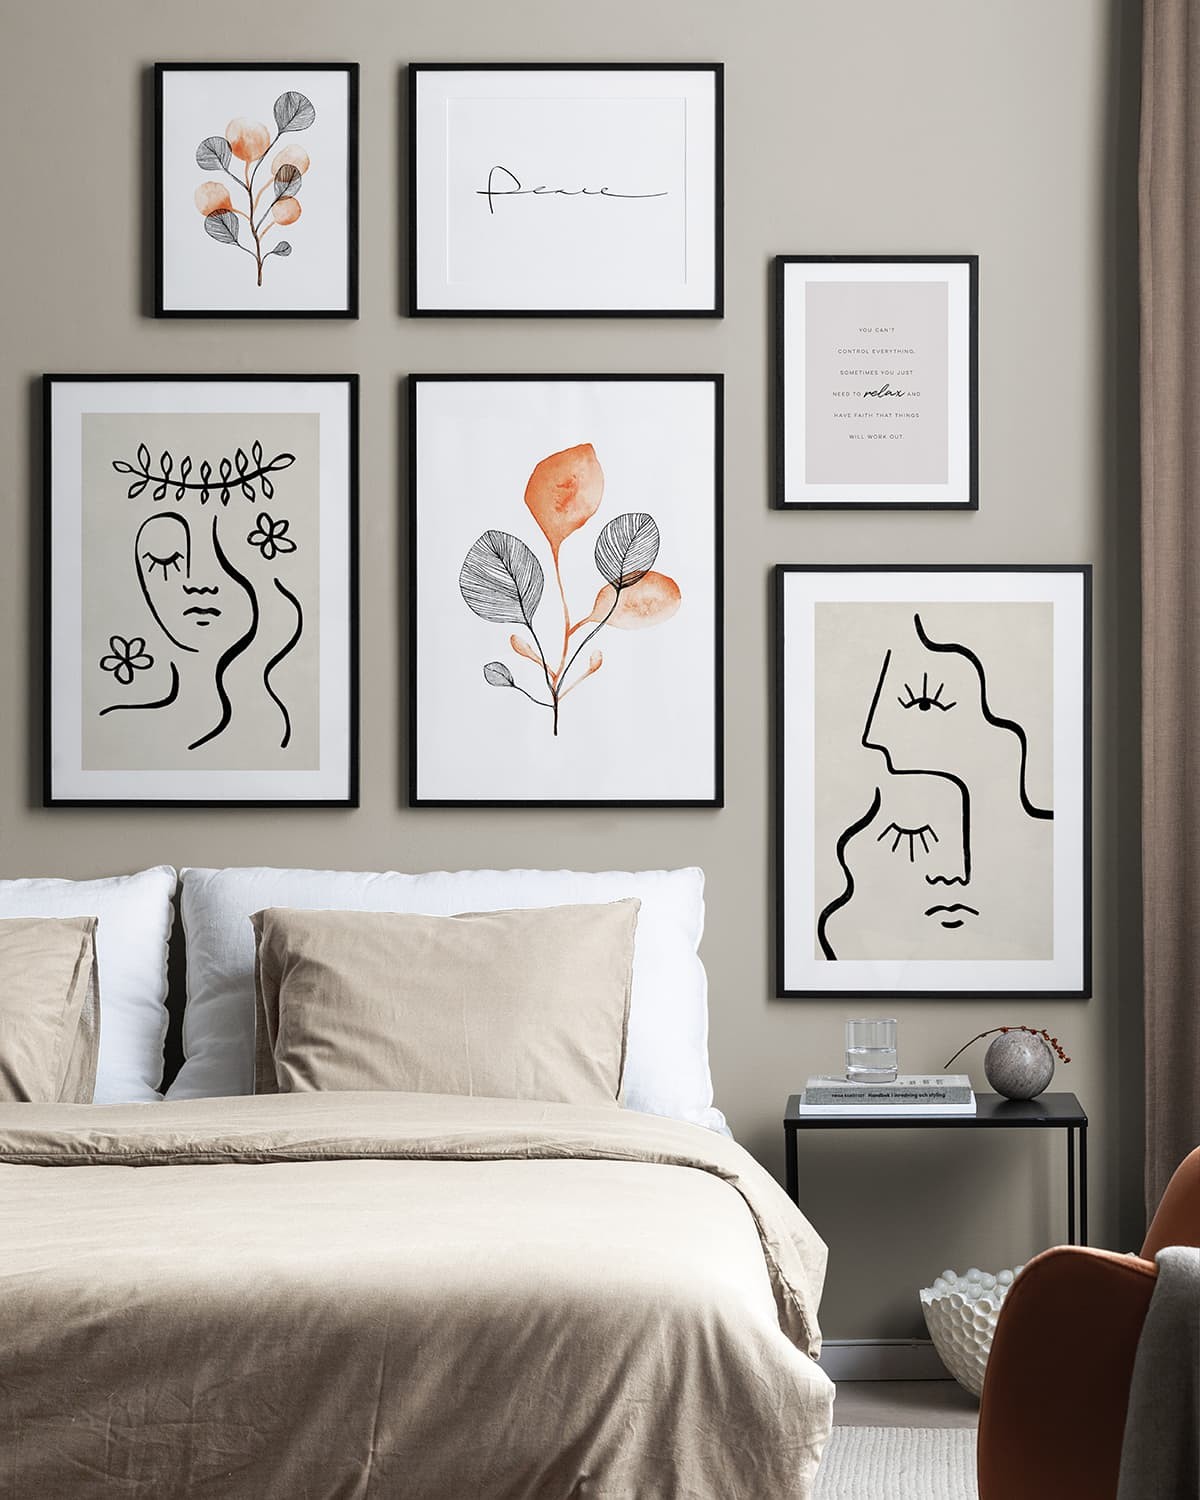 creating a gallery wall in a bedroom black and white artworks on bedroom wall